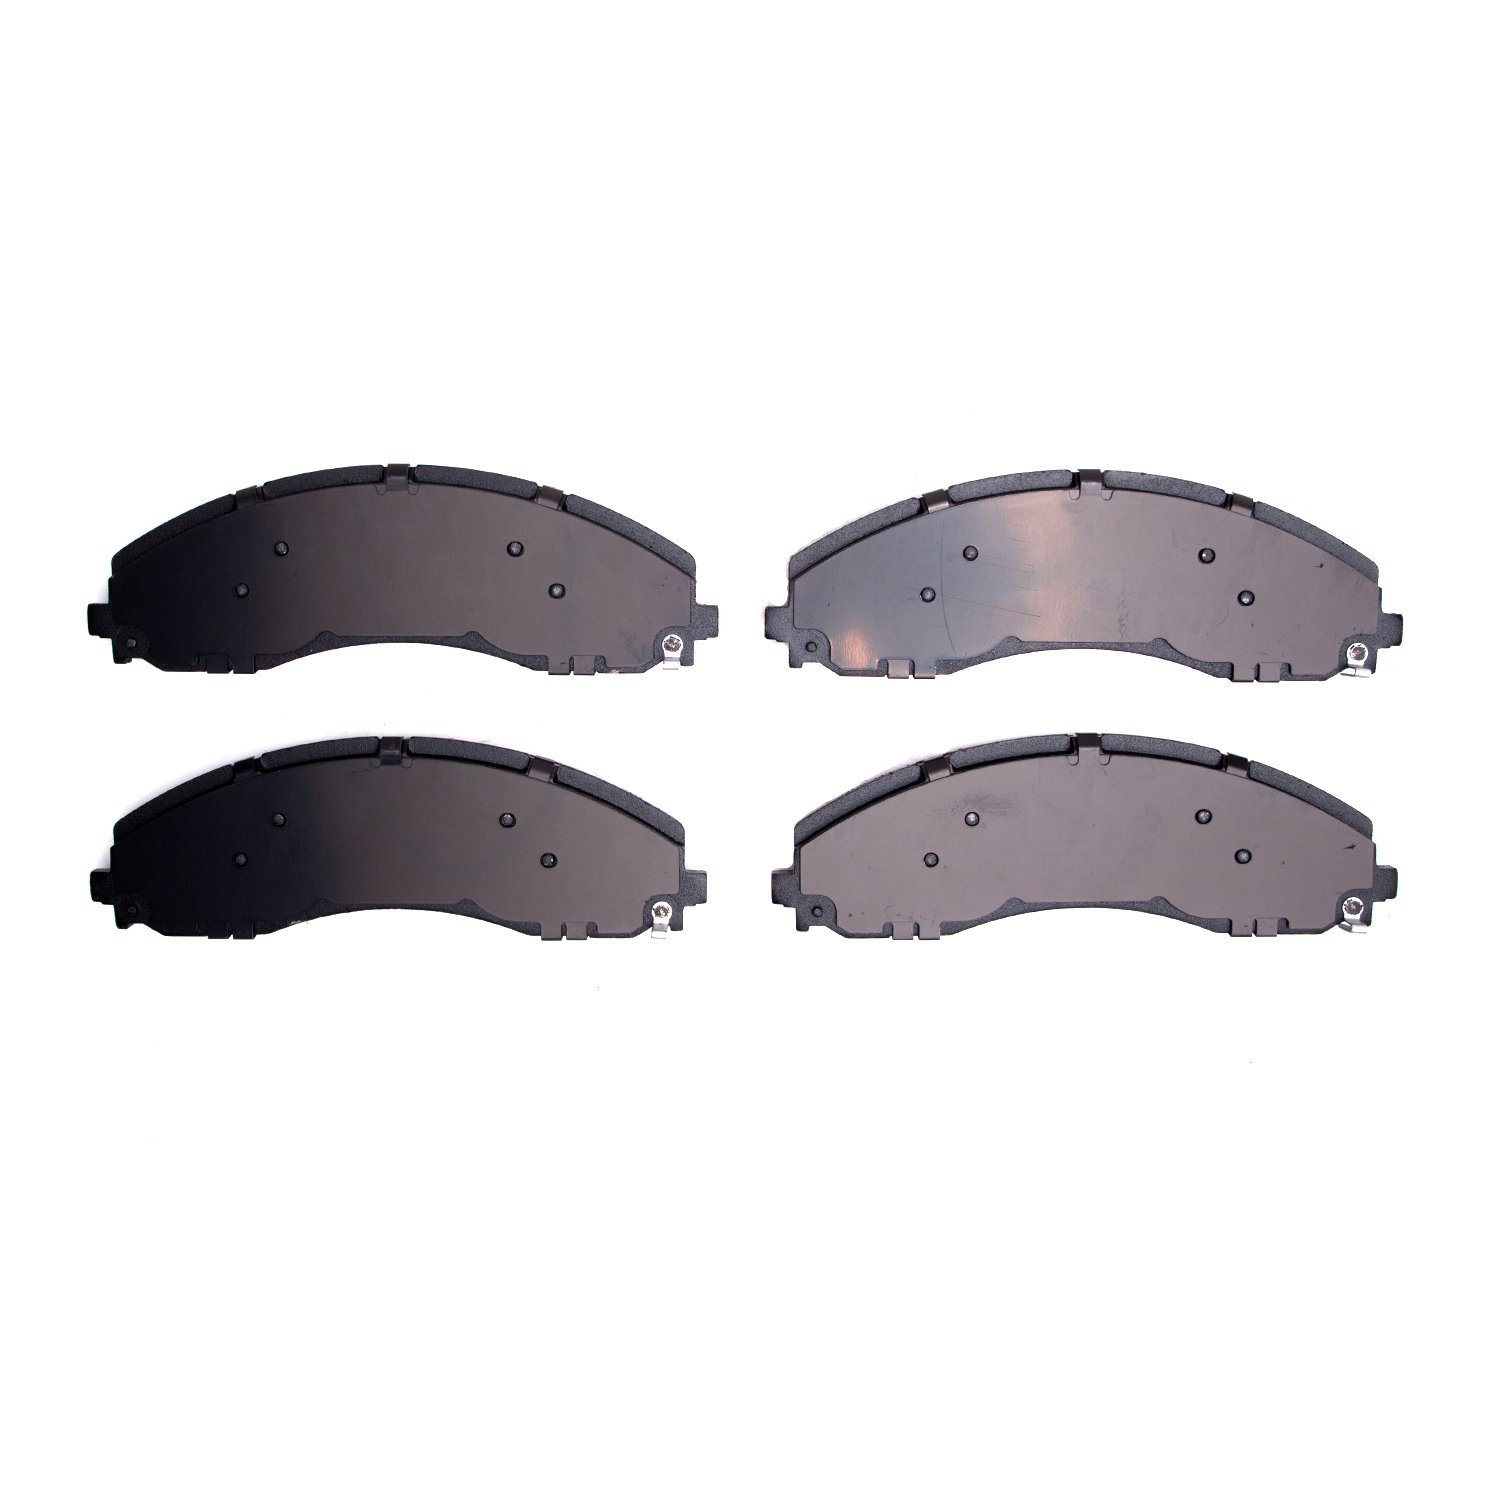 1214-2018-00 Heavy-Duty Semi-Metallic Brake Pads, Fits Select Ford/Lincoln/Mercury/Mazda, Position: Fr,Front,Fr & Rr,Rear,Rr